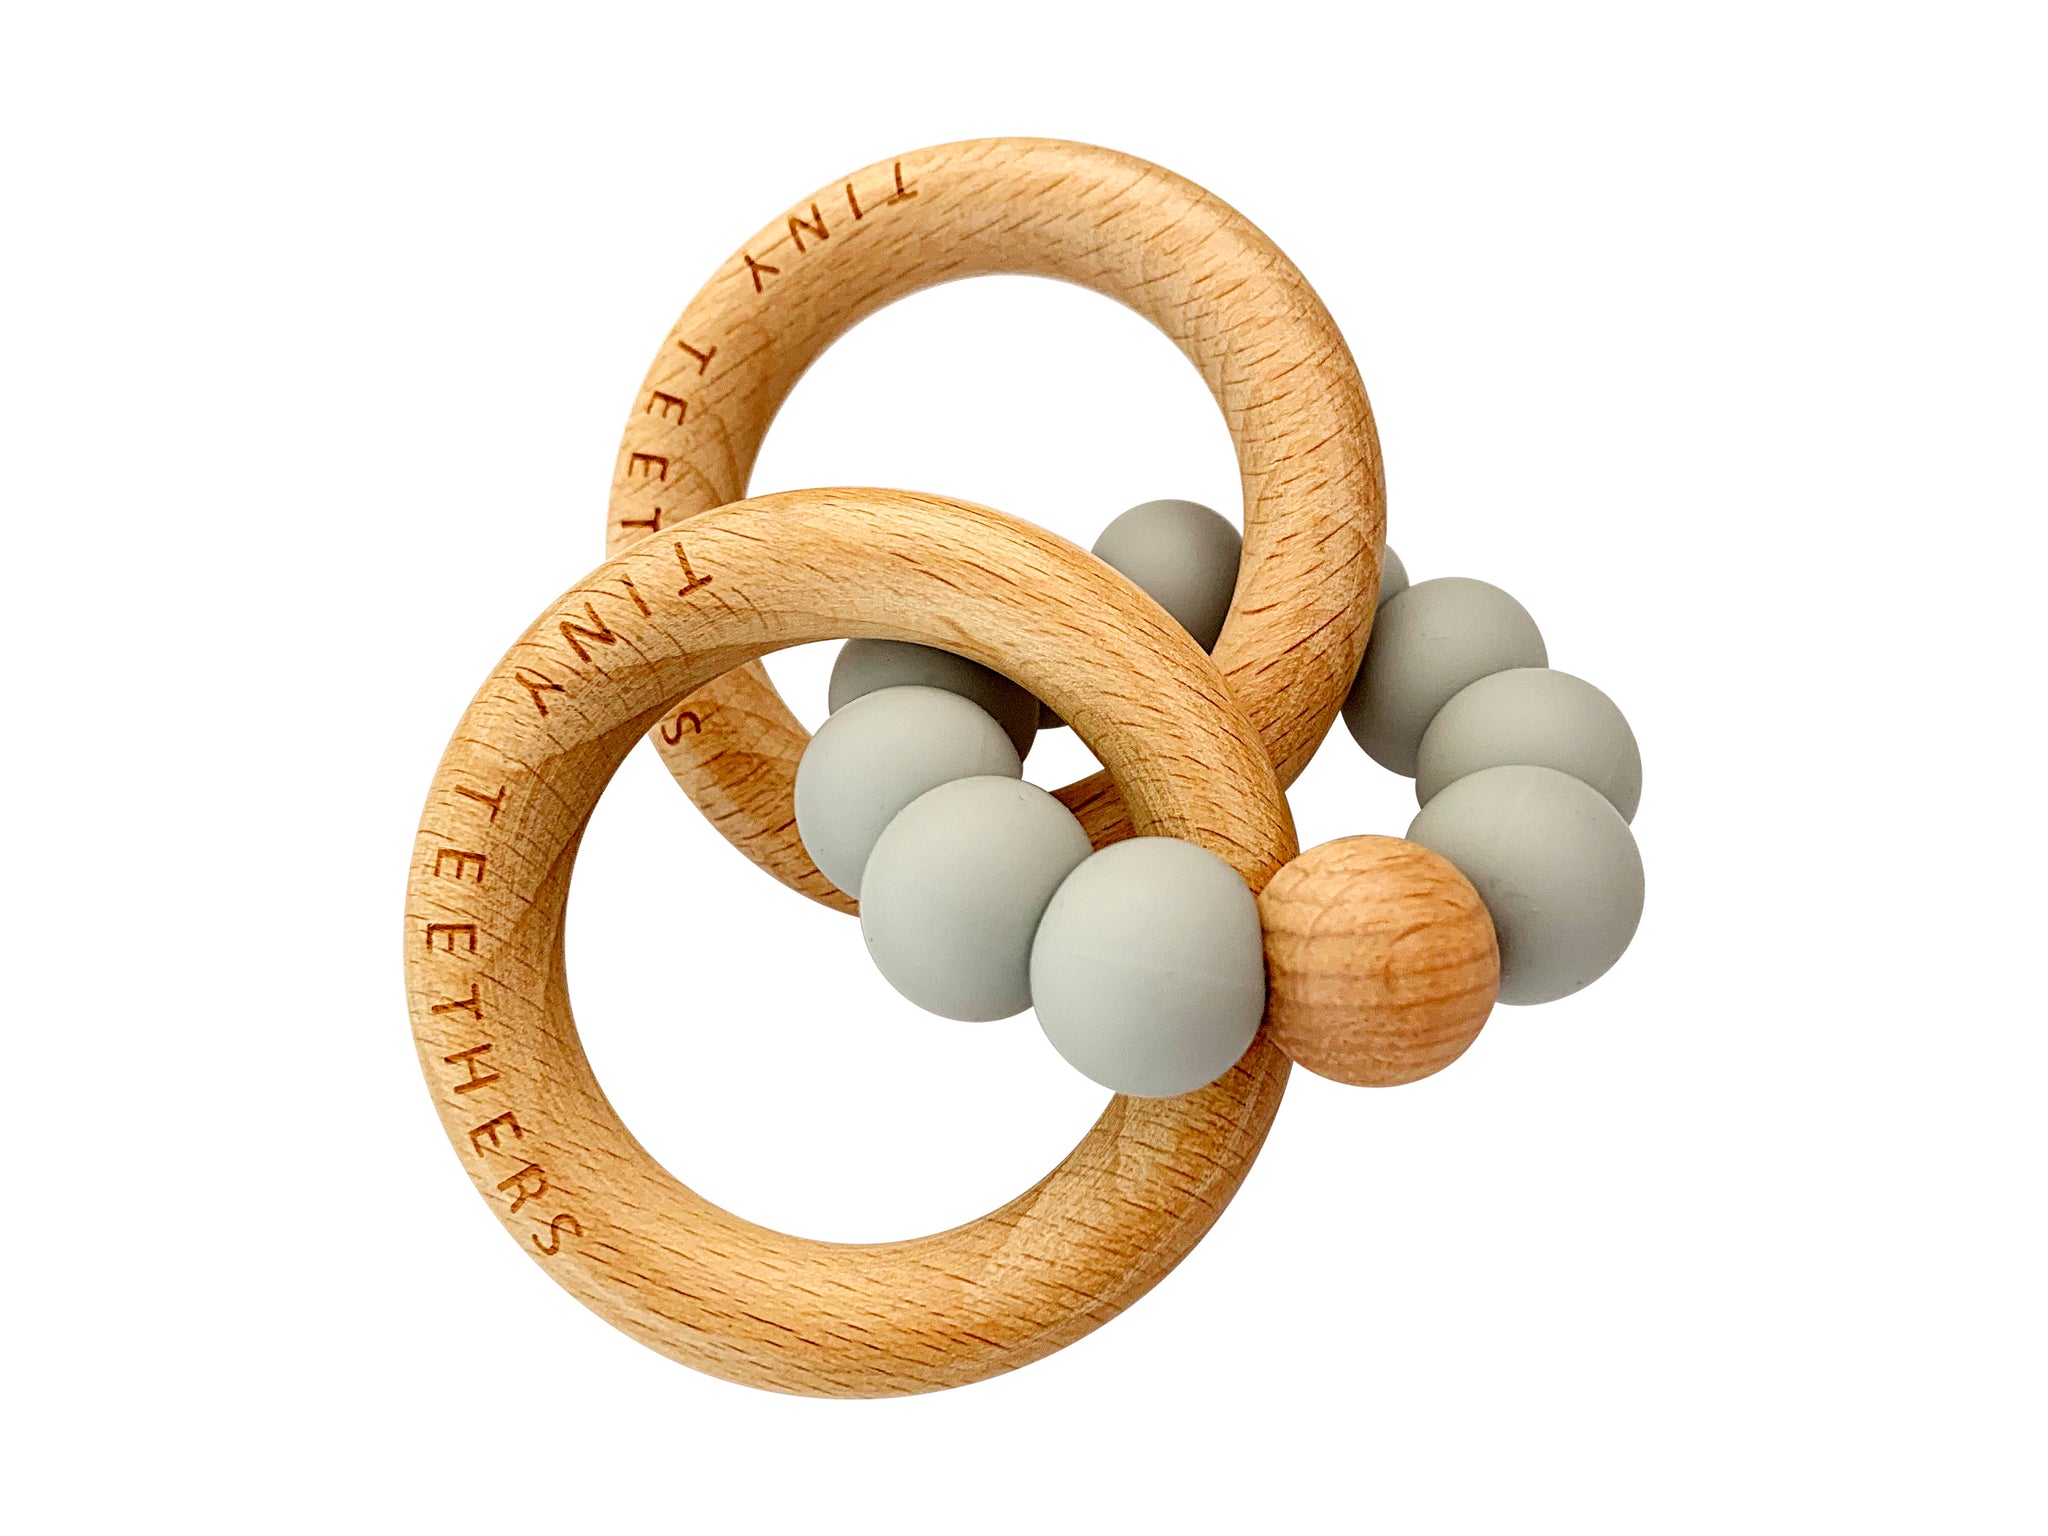 Wooden Rattle Teethers